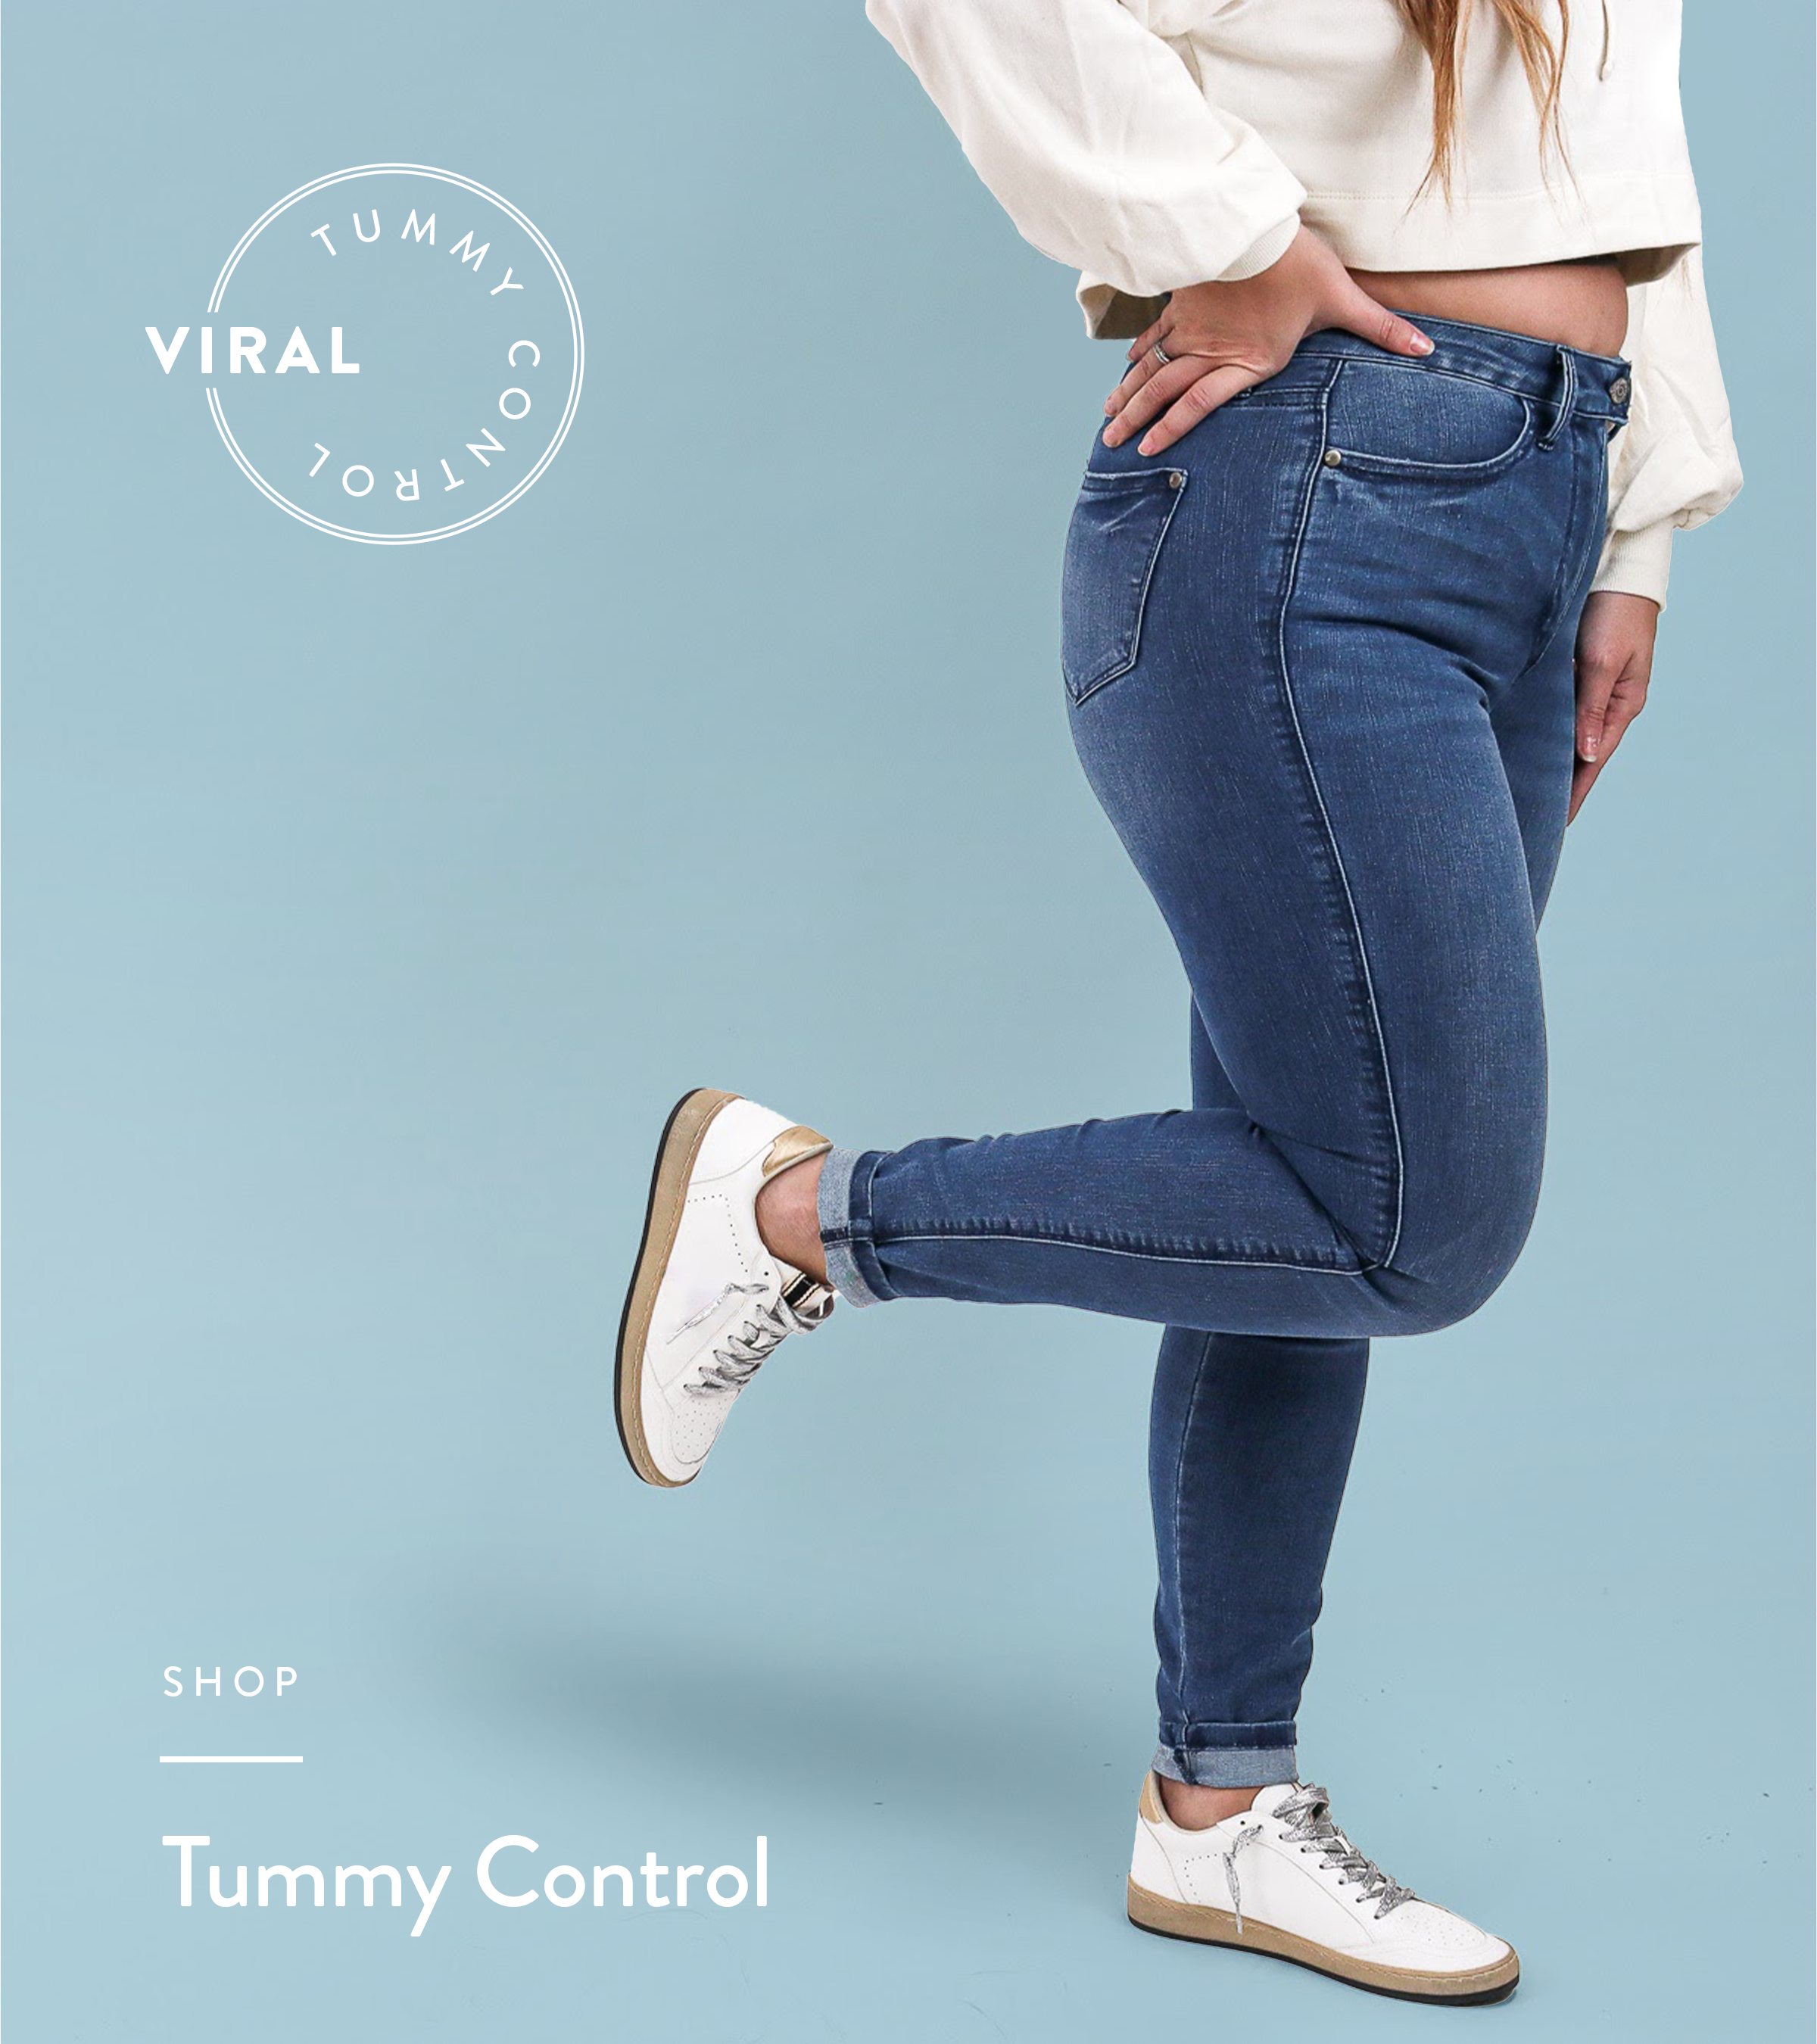 Did you try tummy control jeans 👖 before? Follow @makeupstoppers